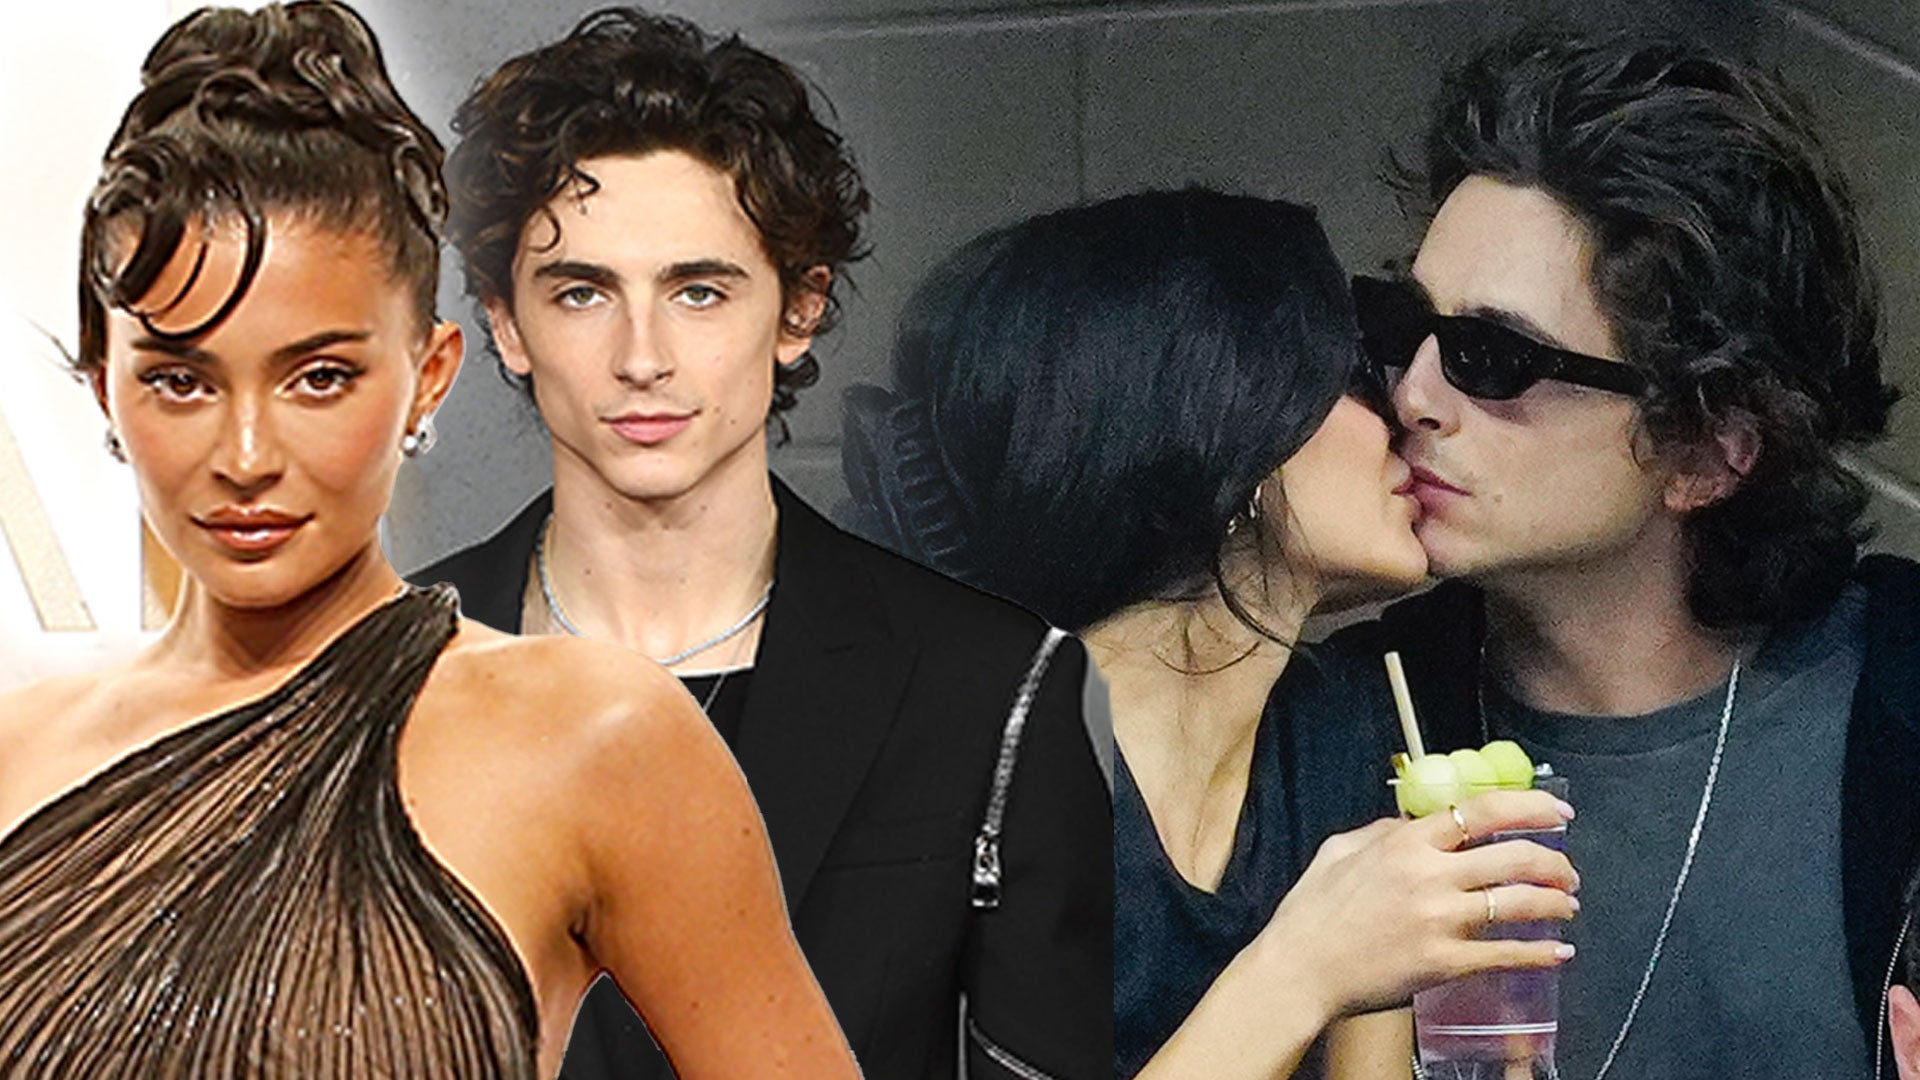 Kylie Jenner Introduced Timothee Chalamet to Kardashian Family